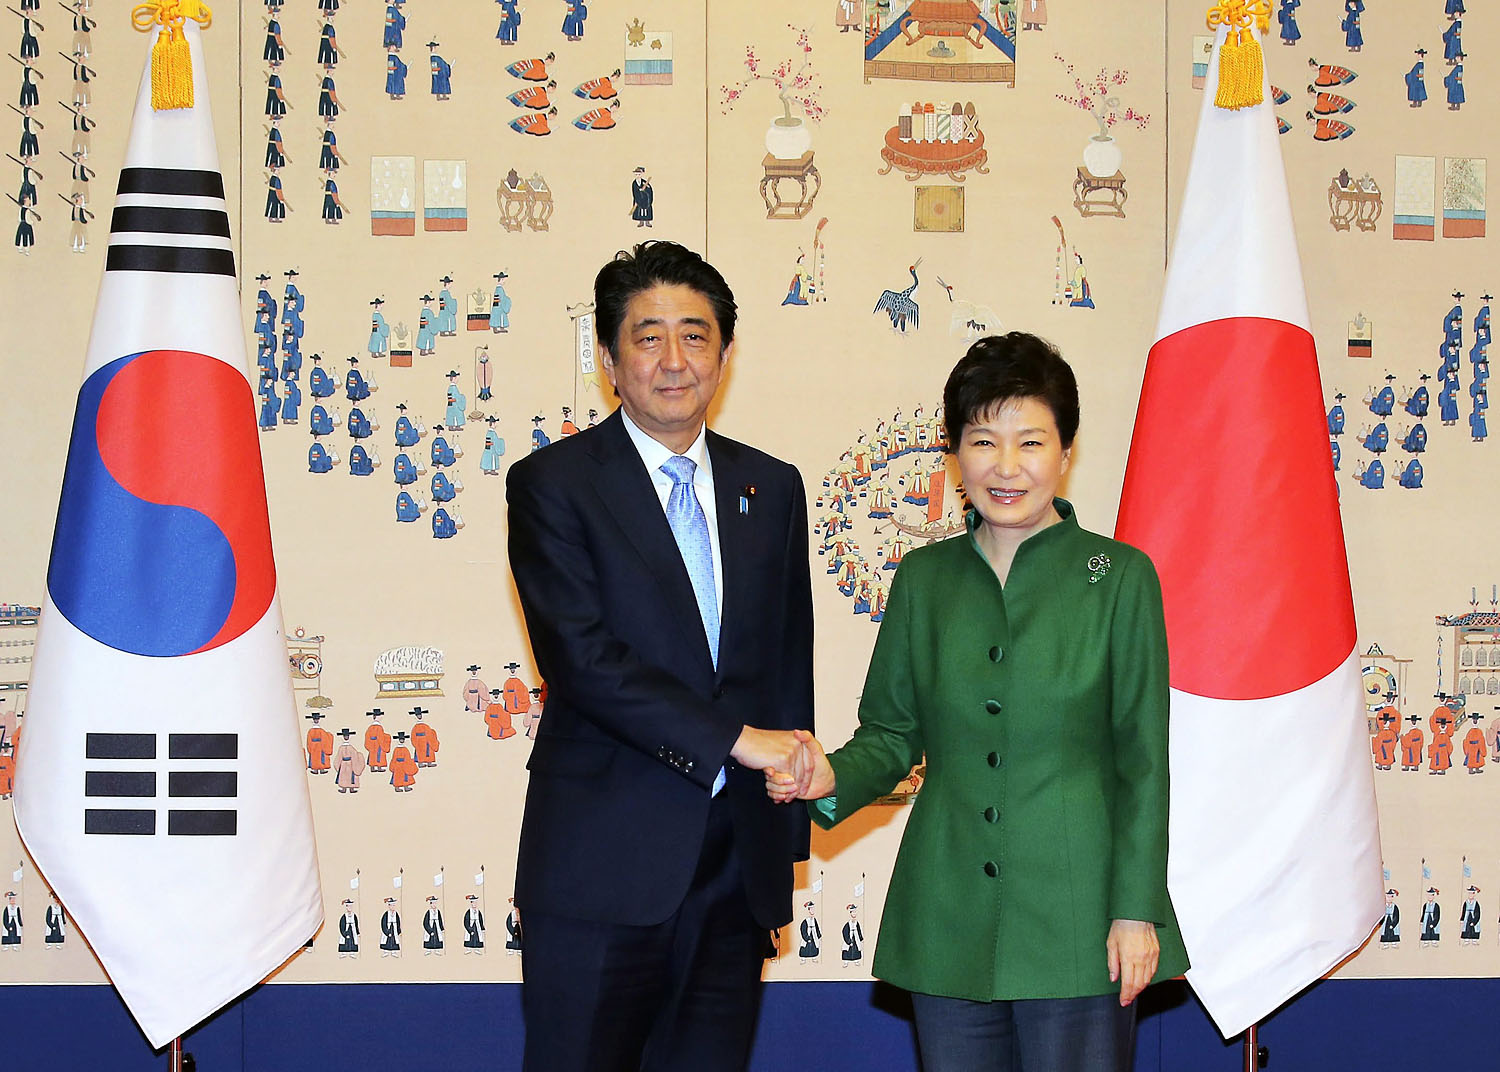 Japan's Prime Minister Shinzo Abe (left) shakes hands with South Korea's President Park Geun-hye before their bilateral summit in Seoul on Monday. Photo: EPA